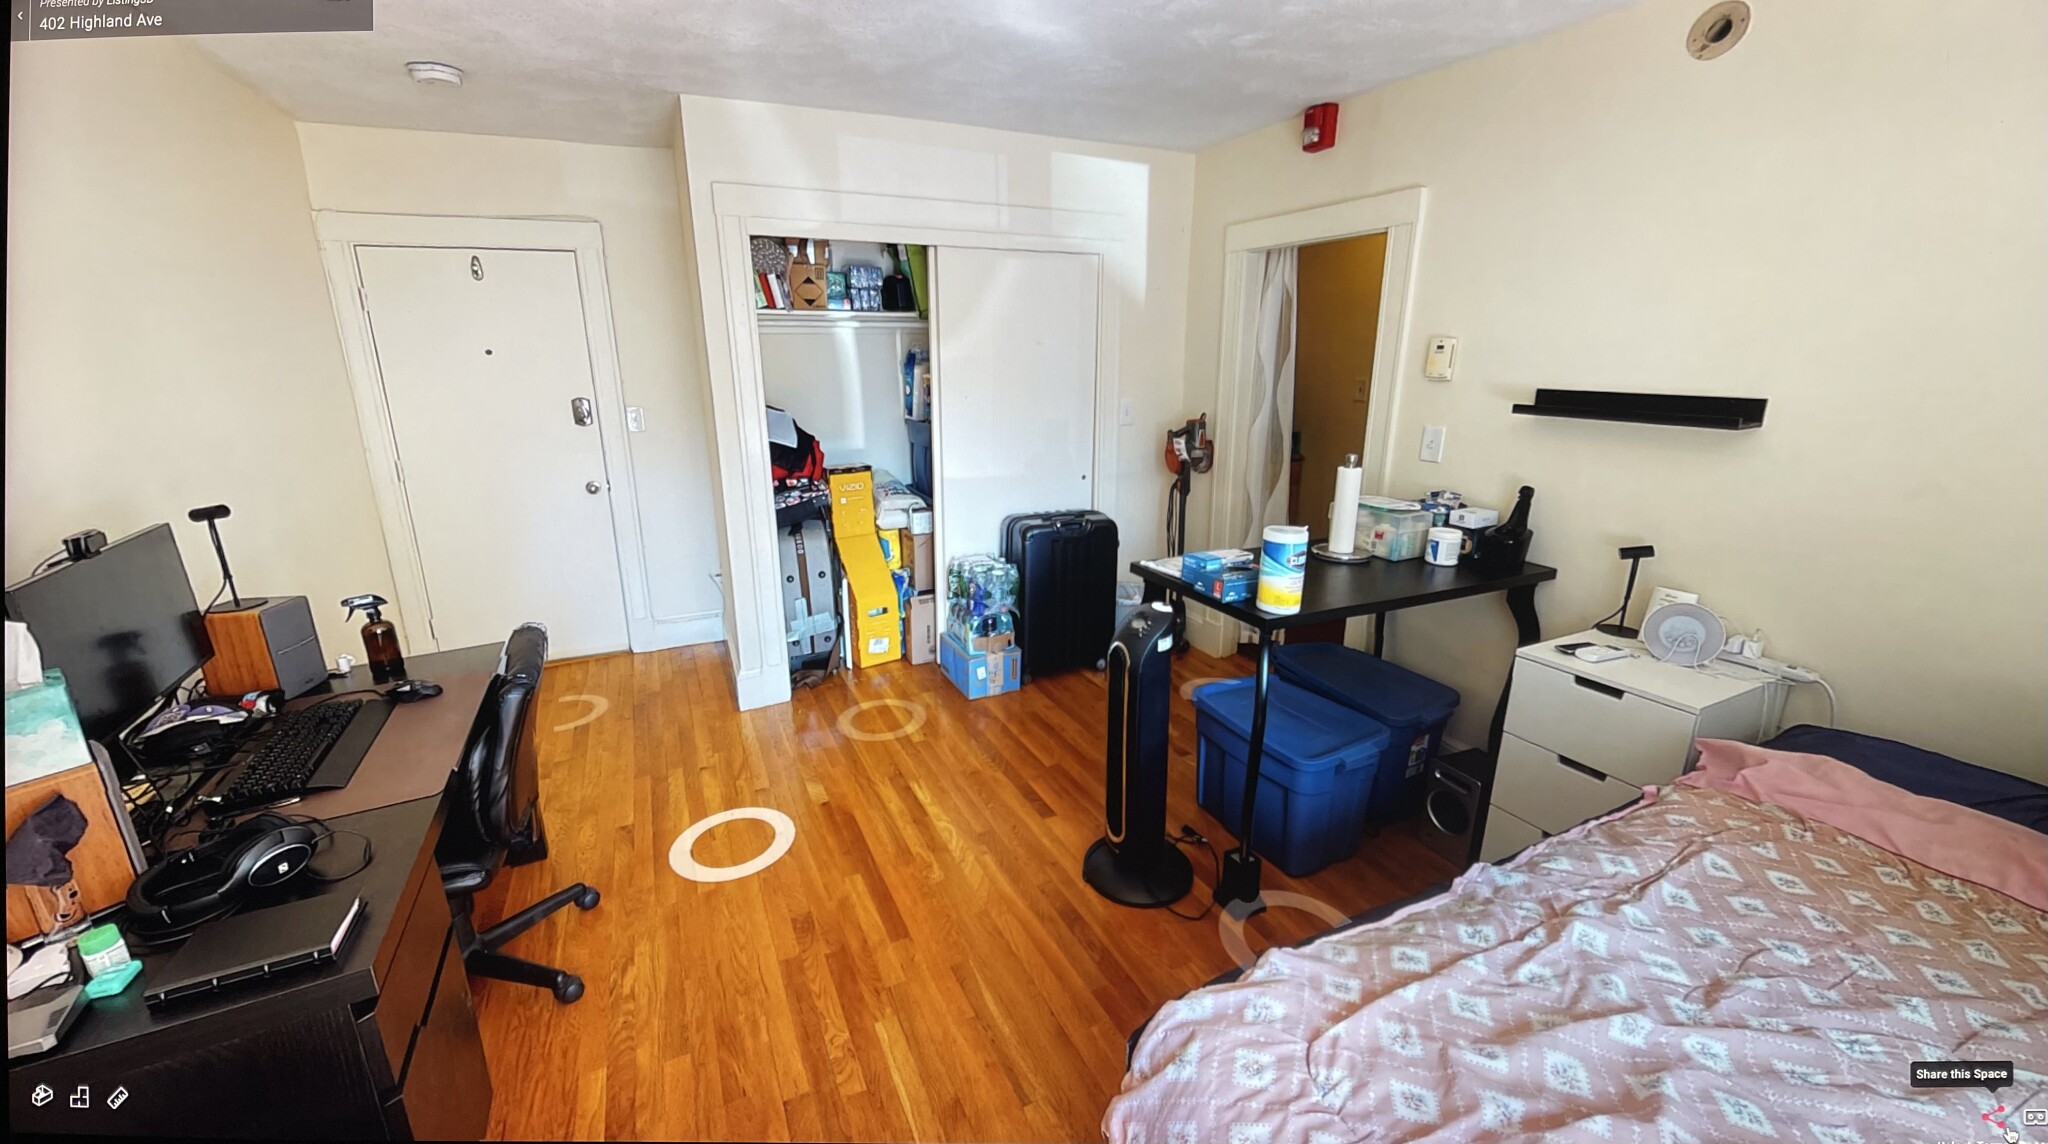 Photos of apartment on College Ave.,Somerville MA 02144